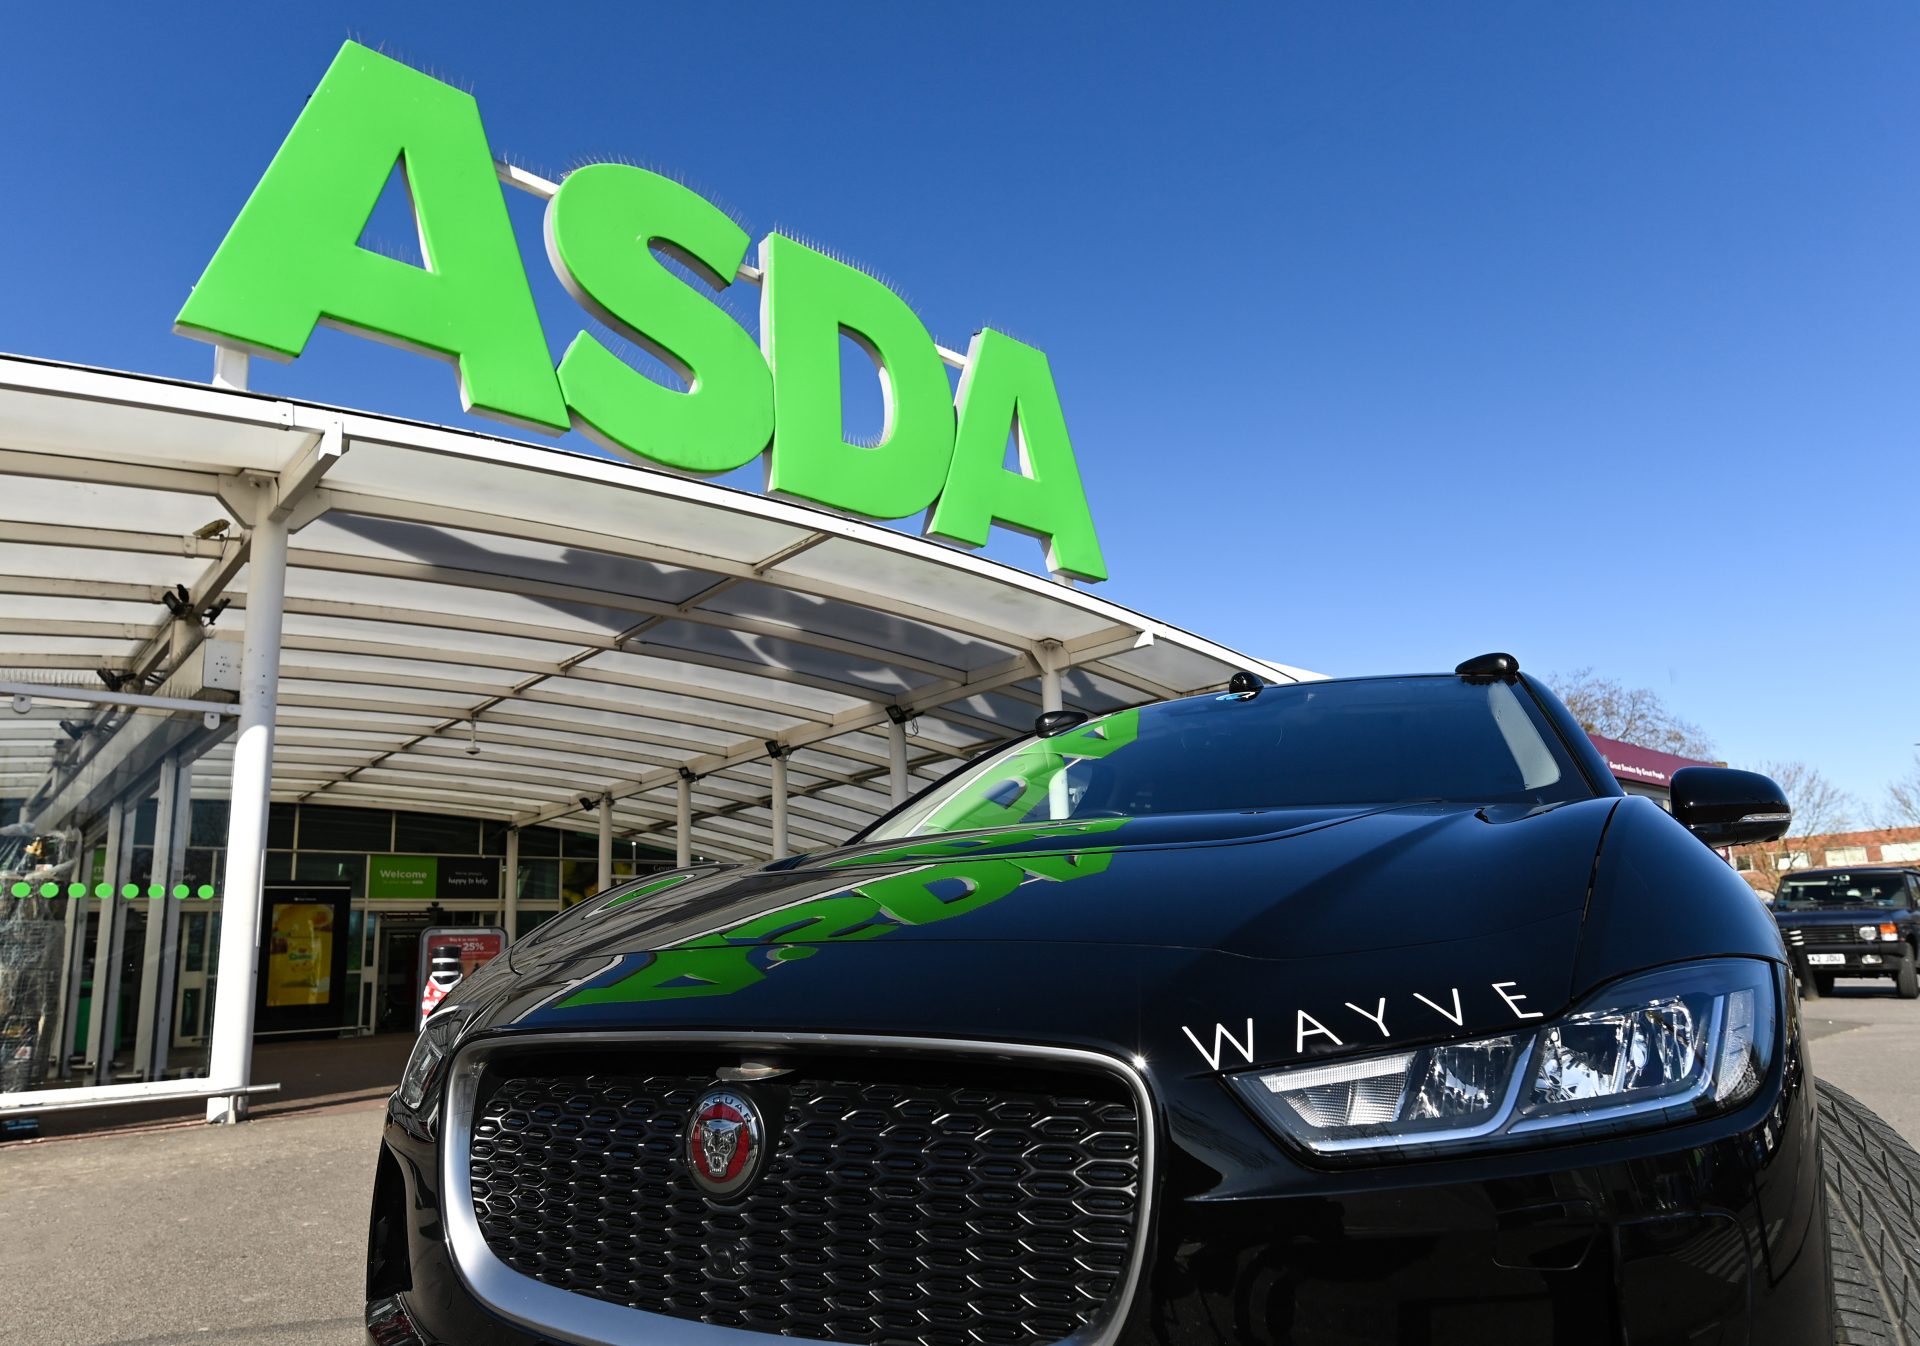 Asda and Wayve launch the largest AV grocery delivery trial in the UK